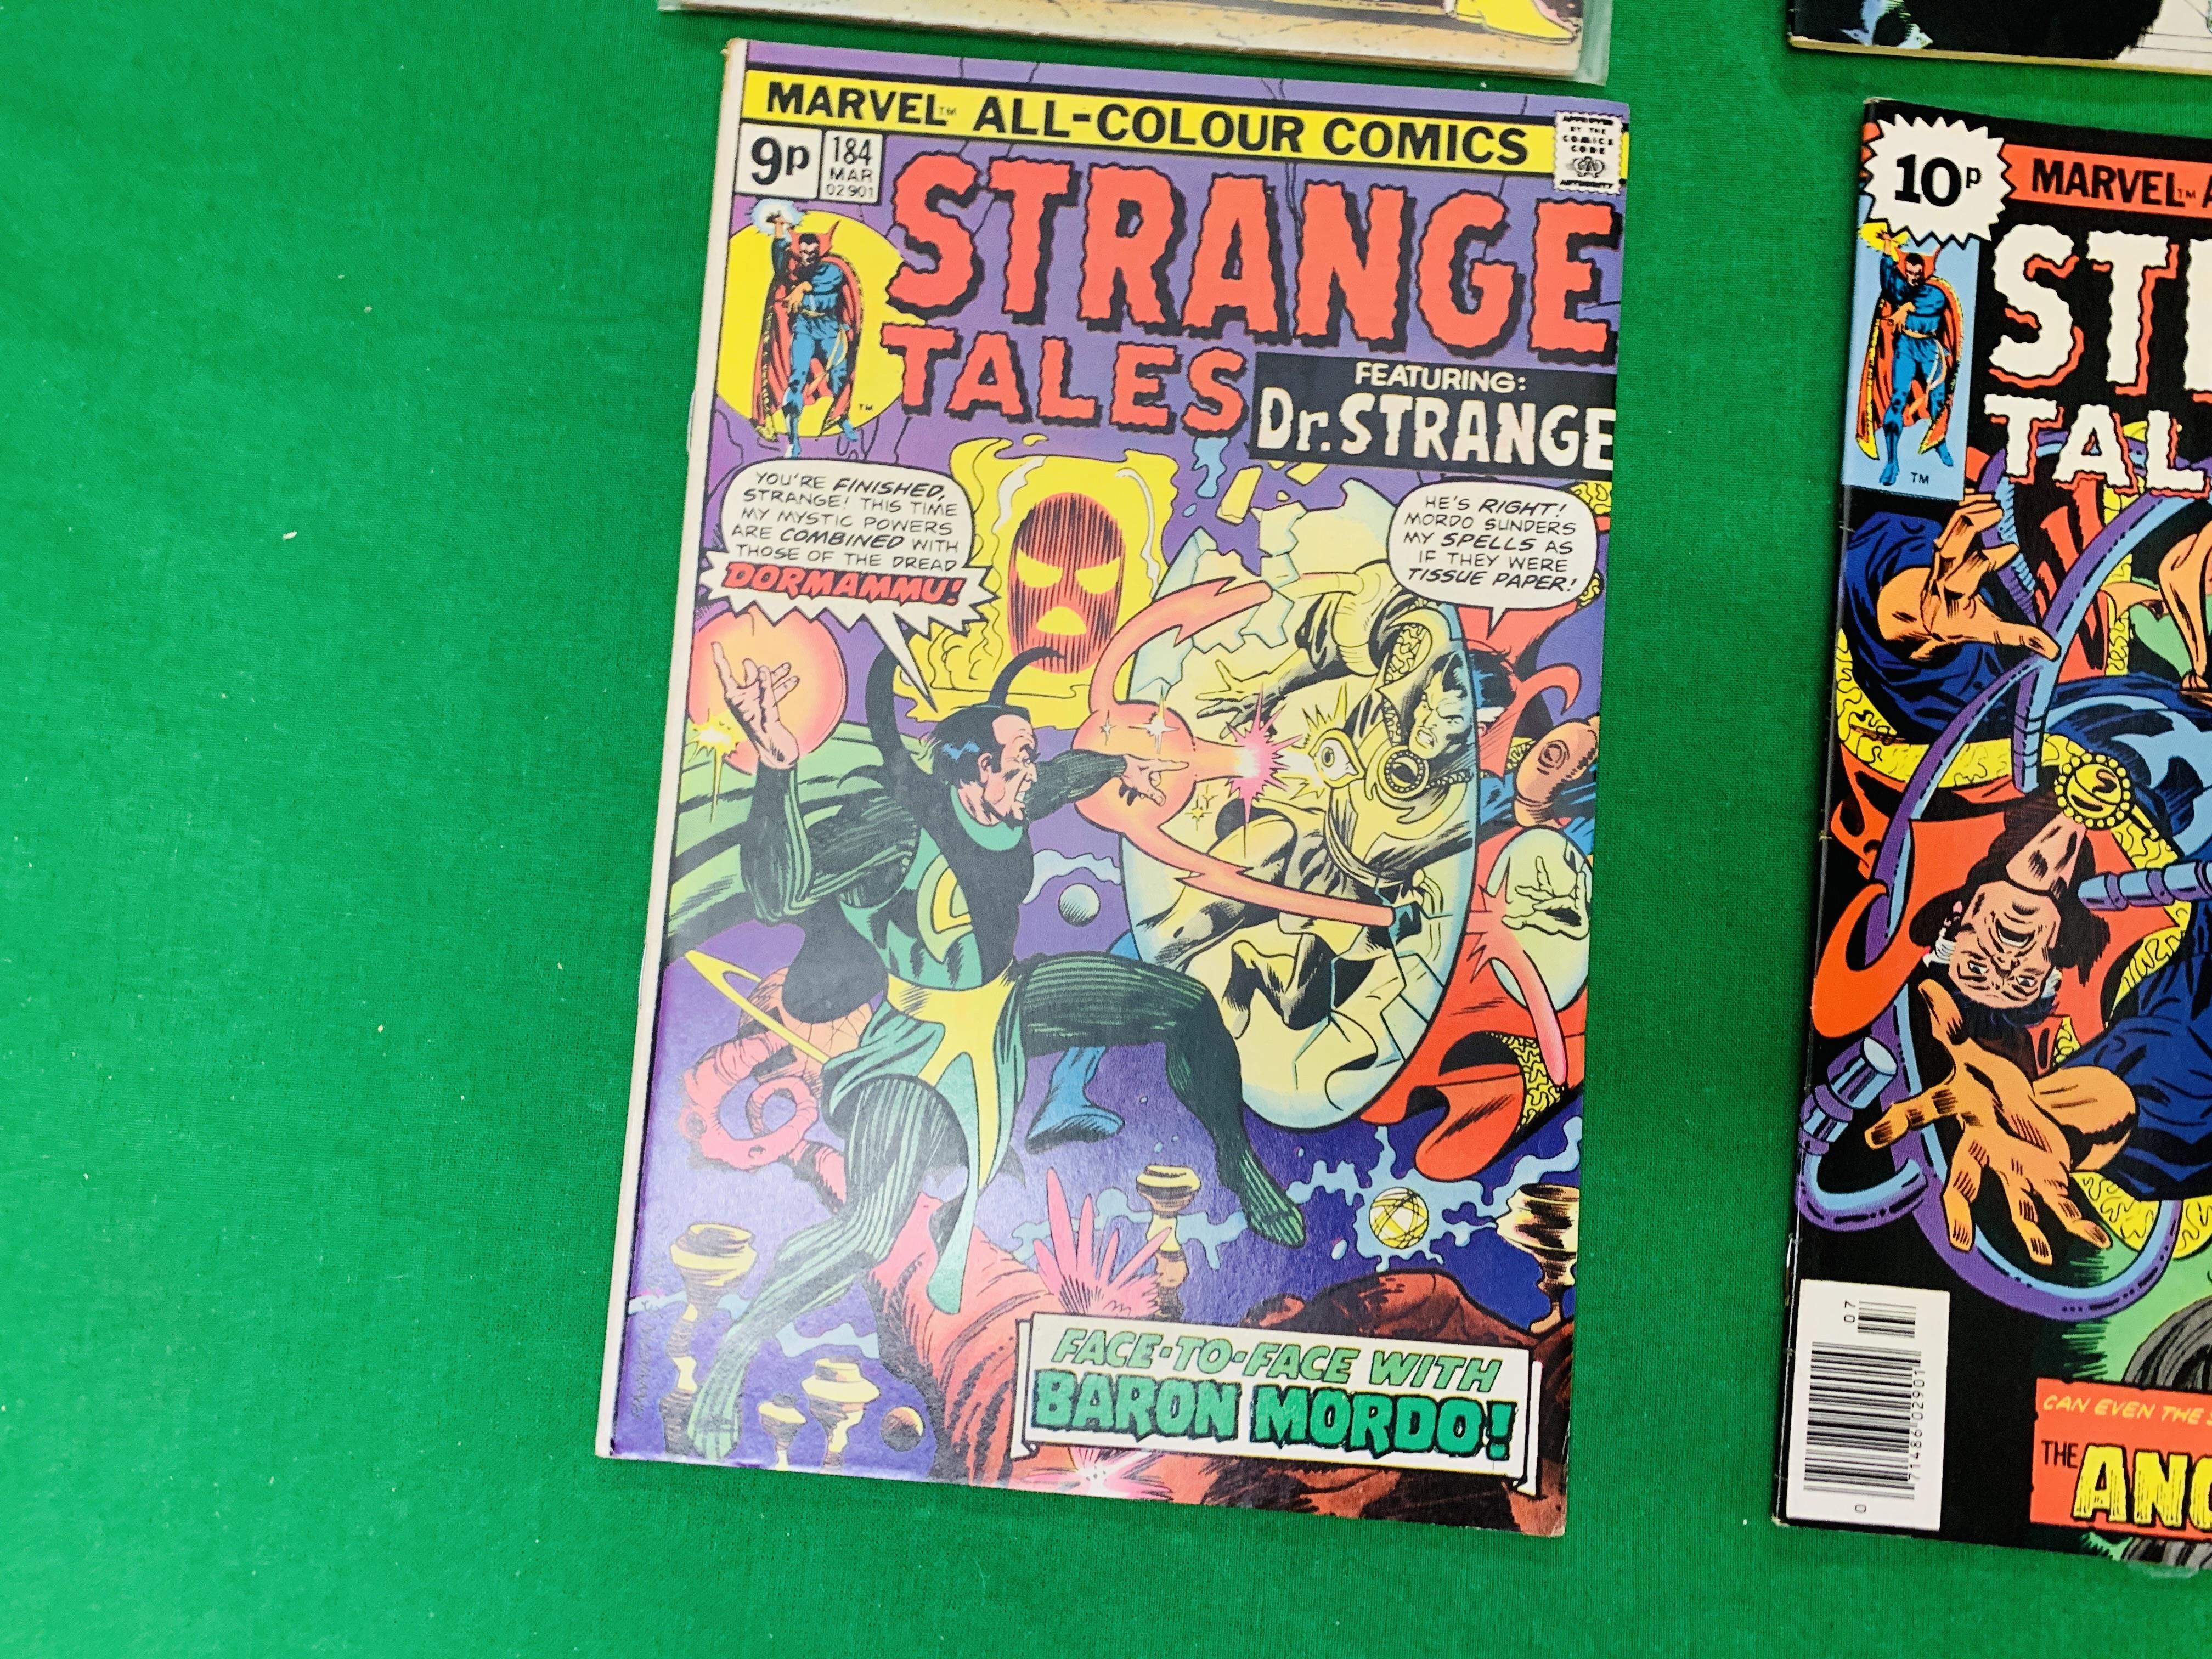 MARVEL STRANGE TALES, NO. 174 - 181, 184, 186. FROM 1974. NO. 178 IS THE FIRST APPEARANCE OF MAGNUS. - Image 10 of 11